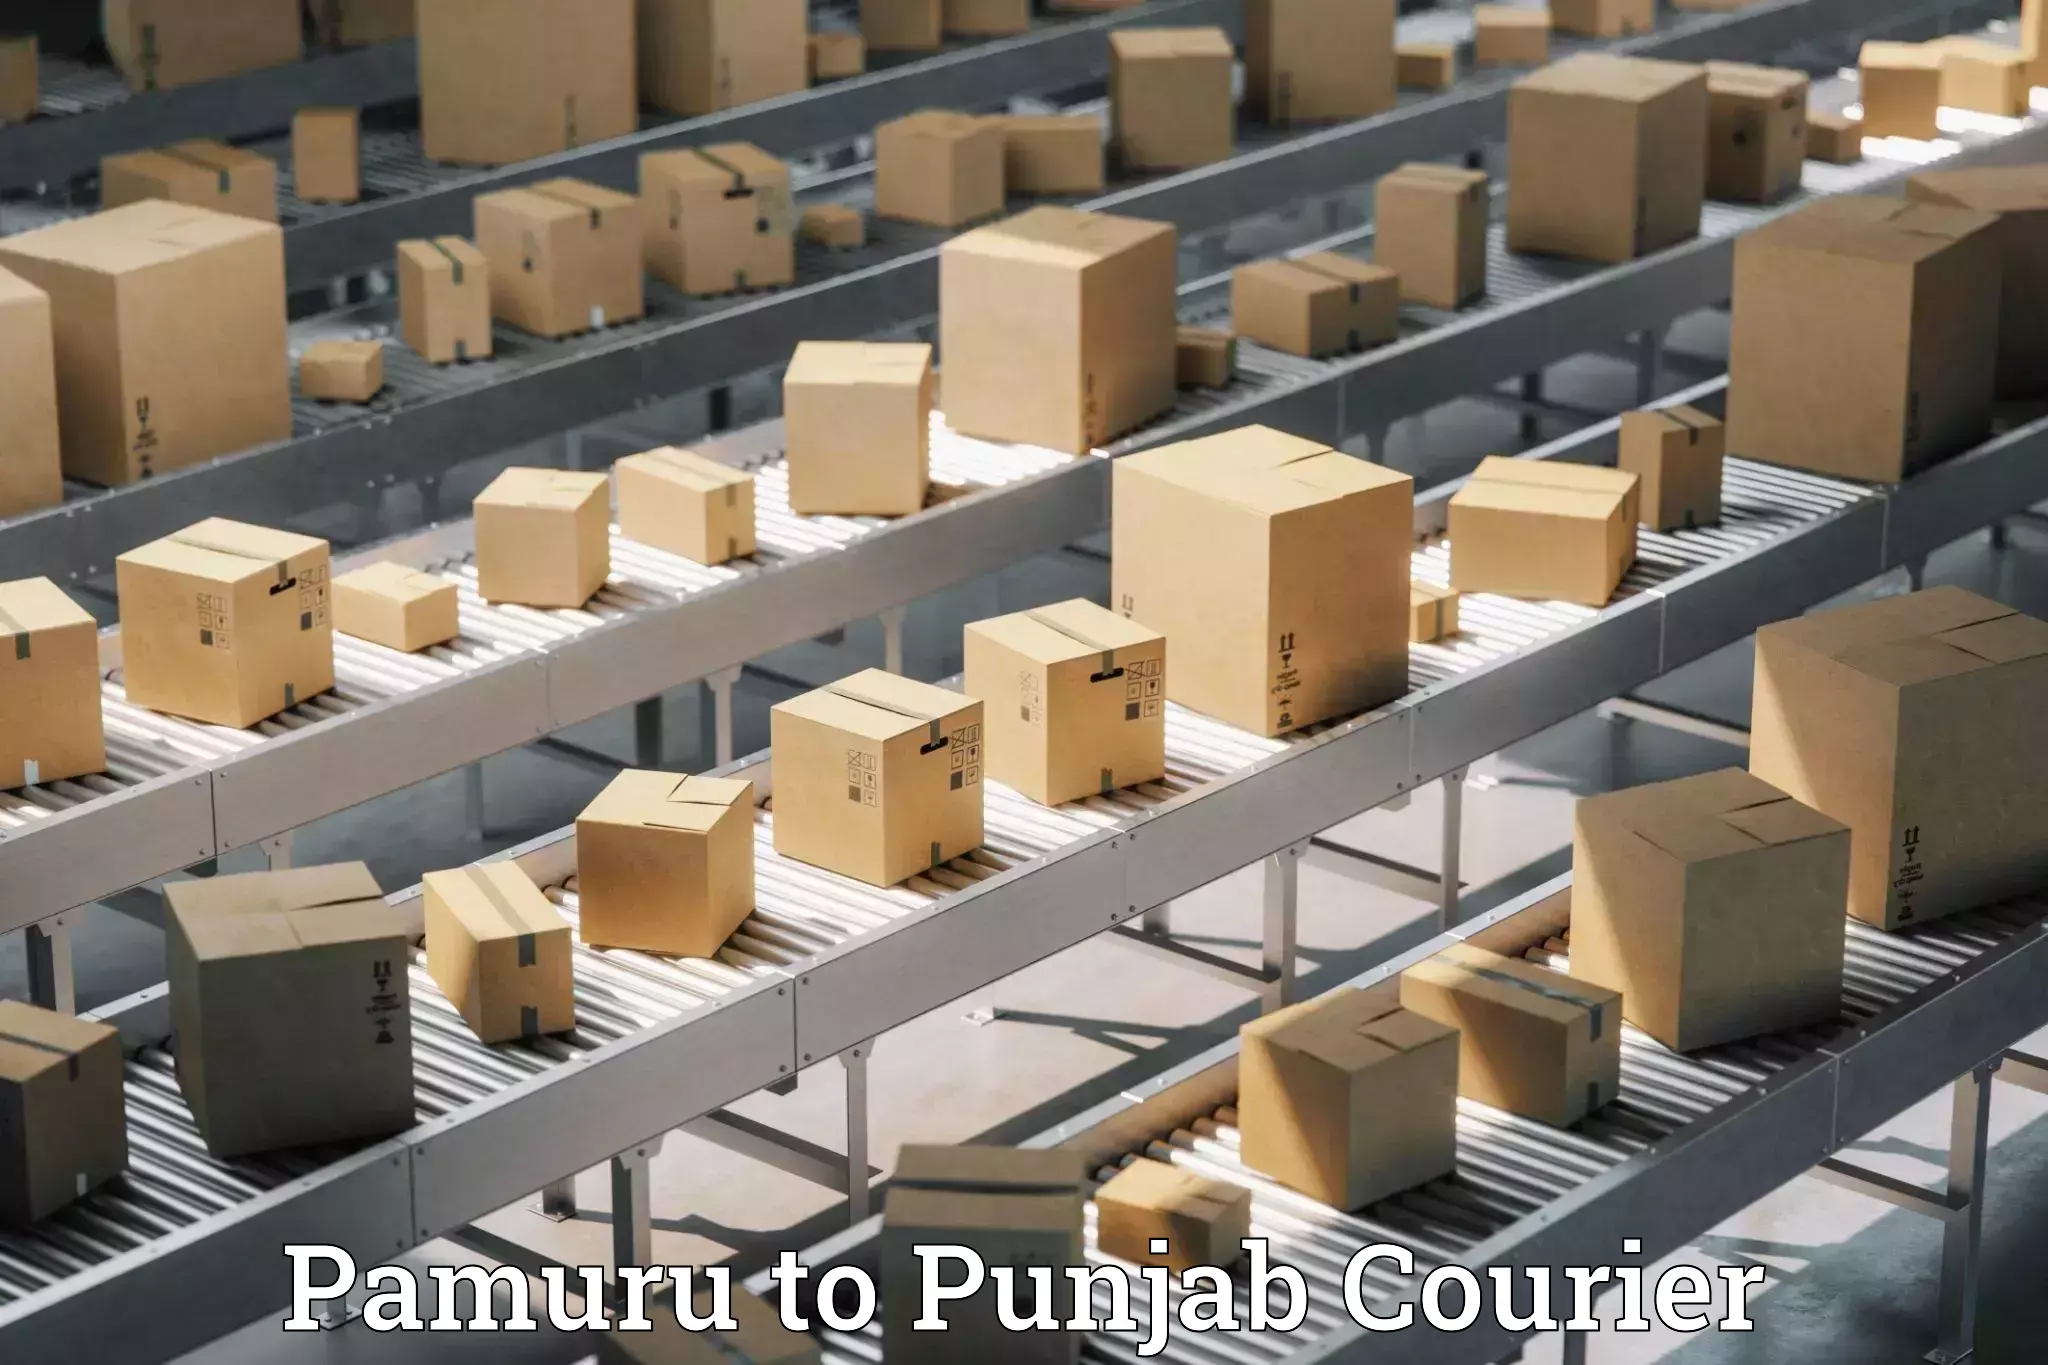 Overnight delivery services Pamuru to Punjab